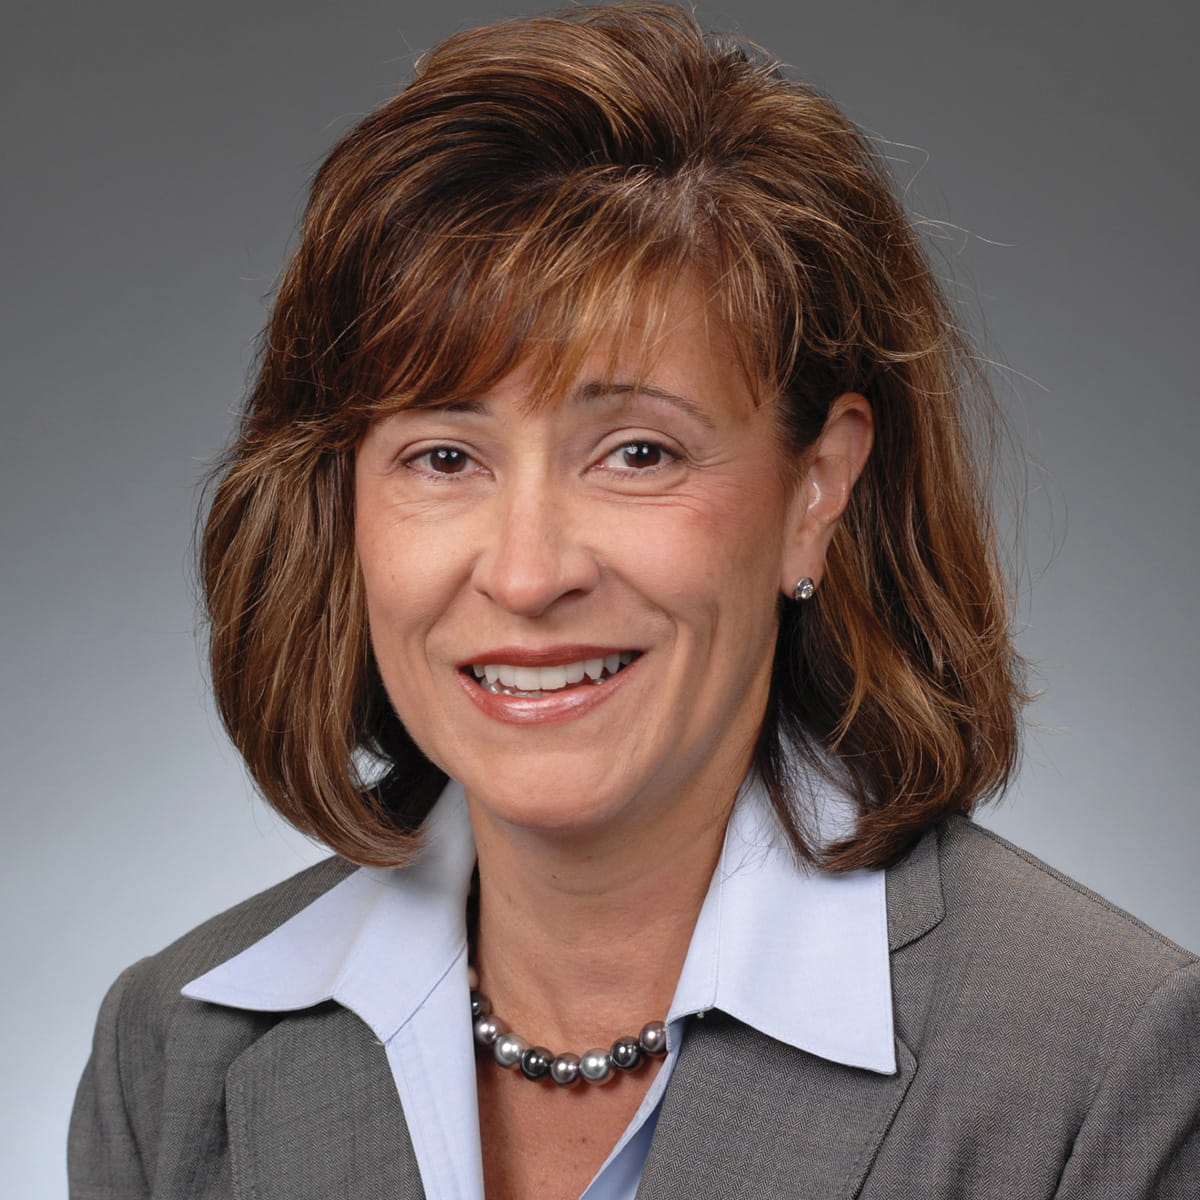 Beth A. Kost, Senior Vice President and Chief Compliance Officer